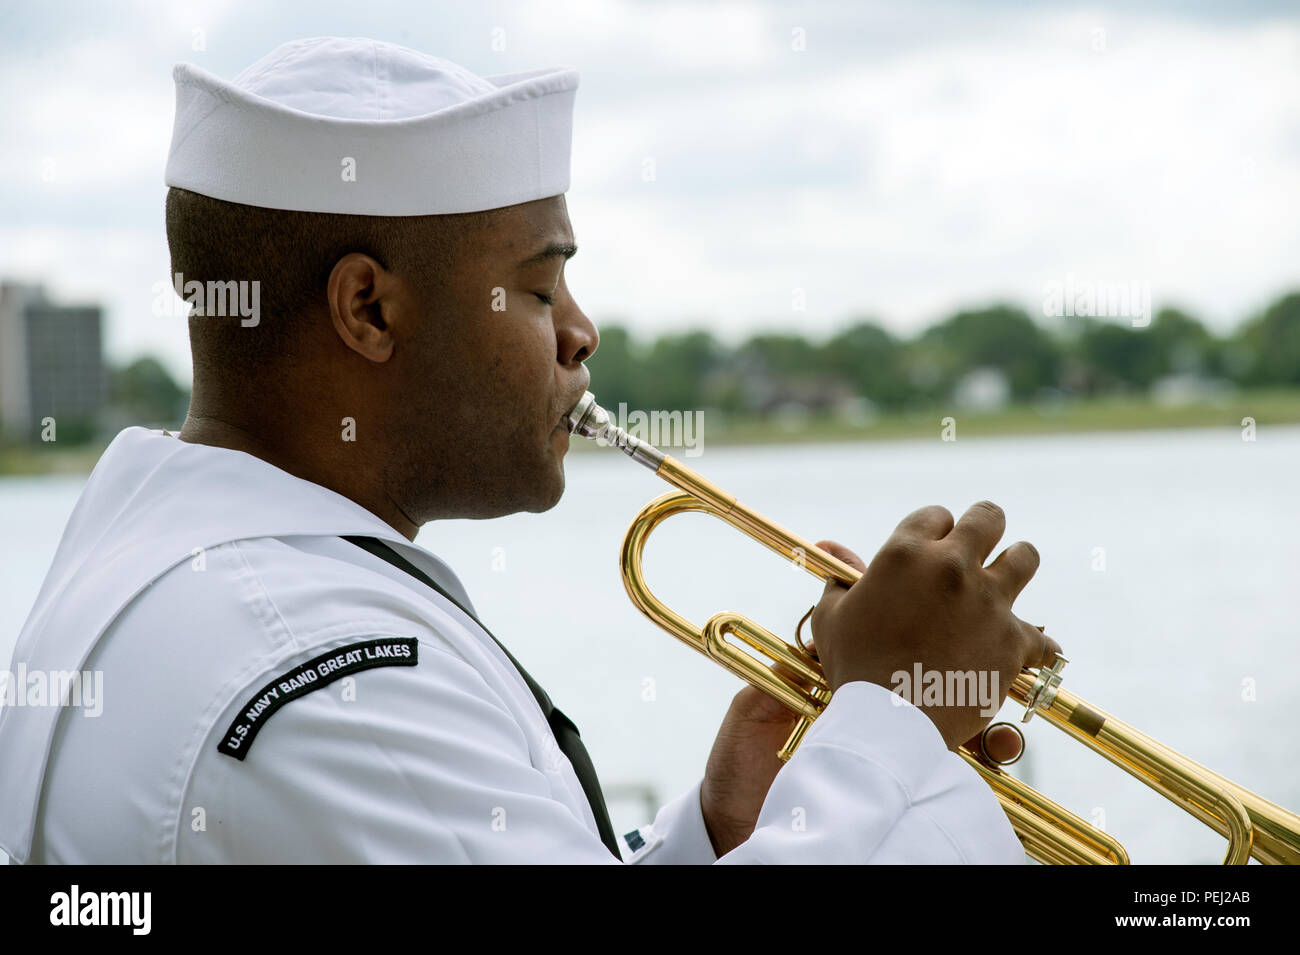 150826-N-CI175-144 DETROIT, Mich. (Aug. 26, 2015) Musician 3rd Class (SW) Michael Bookman, assigned to the Navy Band Great Lakes Brass Band, plays in a concert along Detroit’s downtown RiverWalk as part of Detroit Navy Week. Navy Weeks focus a variety of assets, equipment and personnel on a single city for a week-long series of engagements designed to bring America's Navy closer to the people it protects, in cities that don't have a large naval presence. (U.S. Navy photo by Mass Communication Specialist 1st Class Jon Rasmussen/Released) Stock Photo